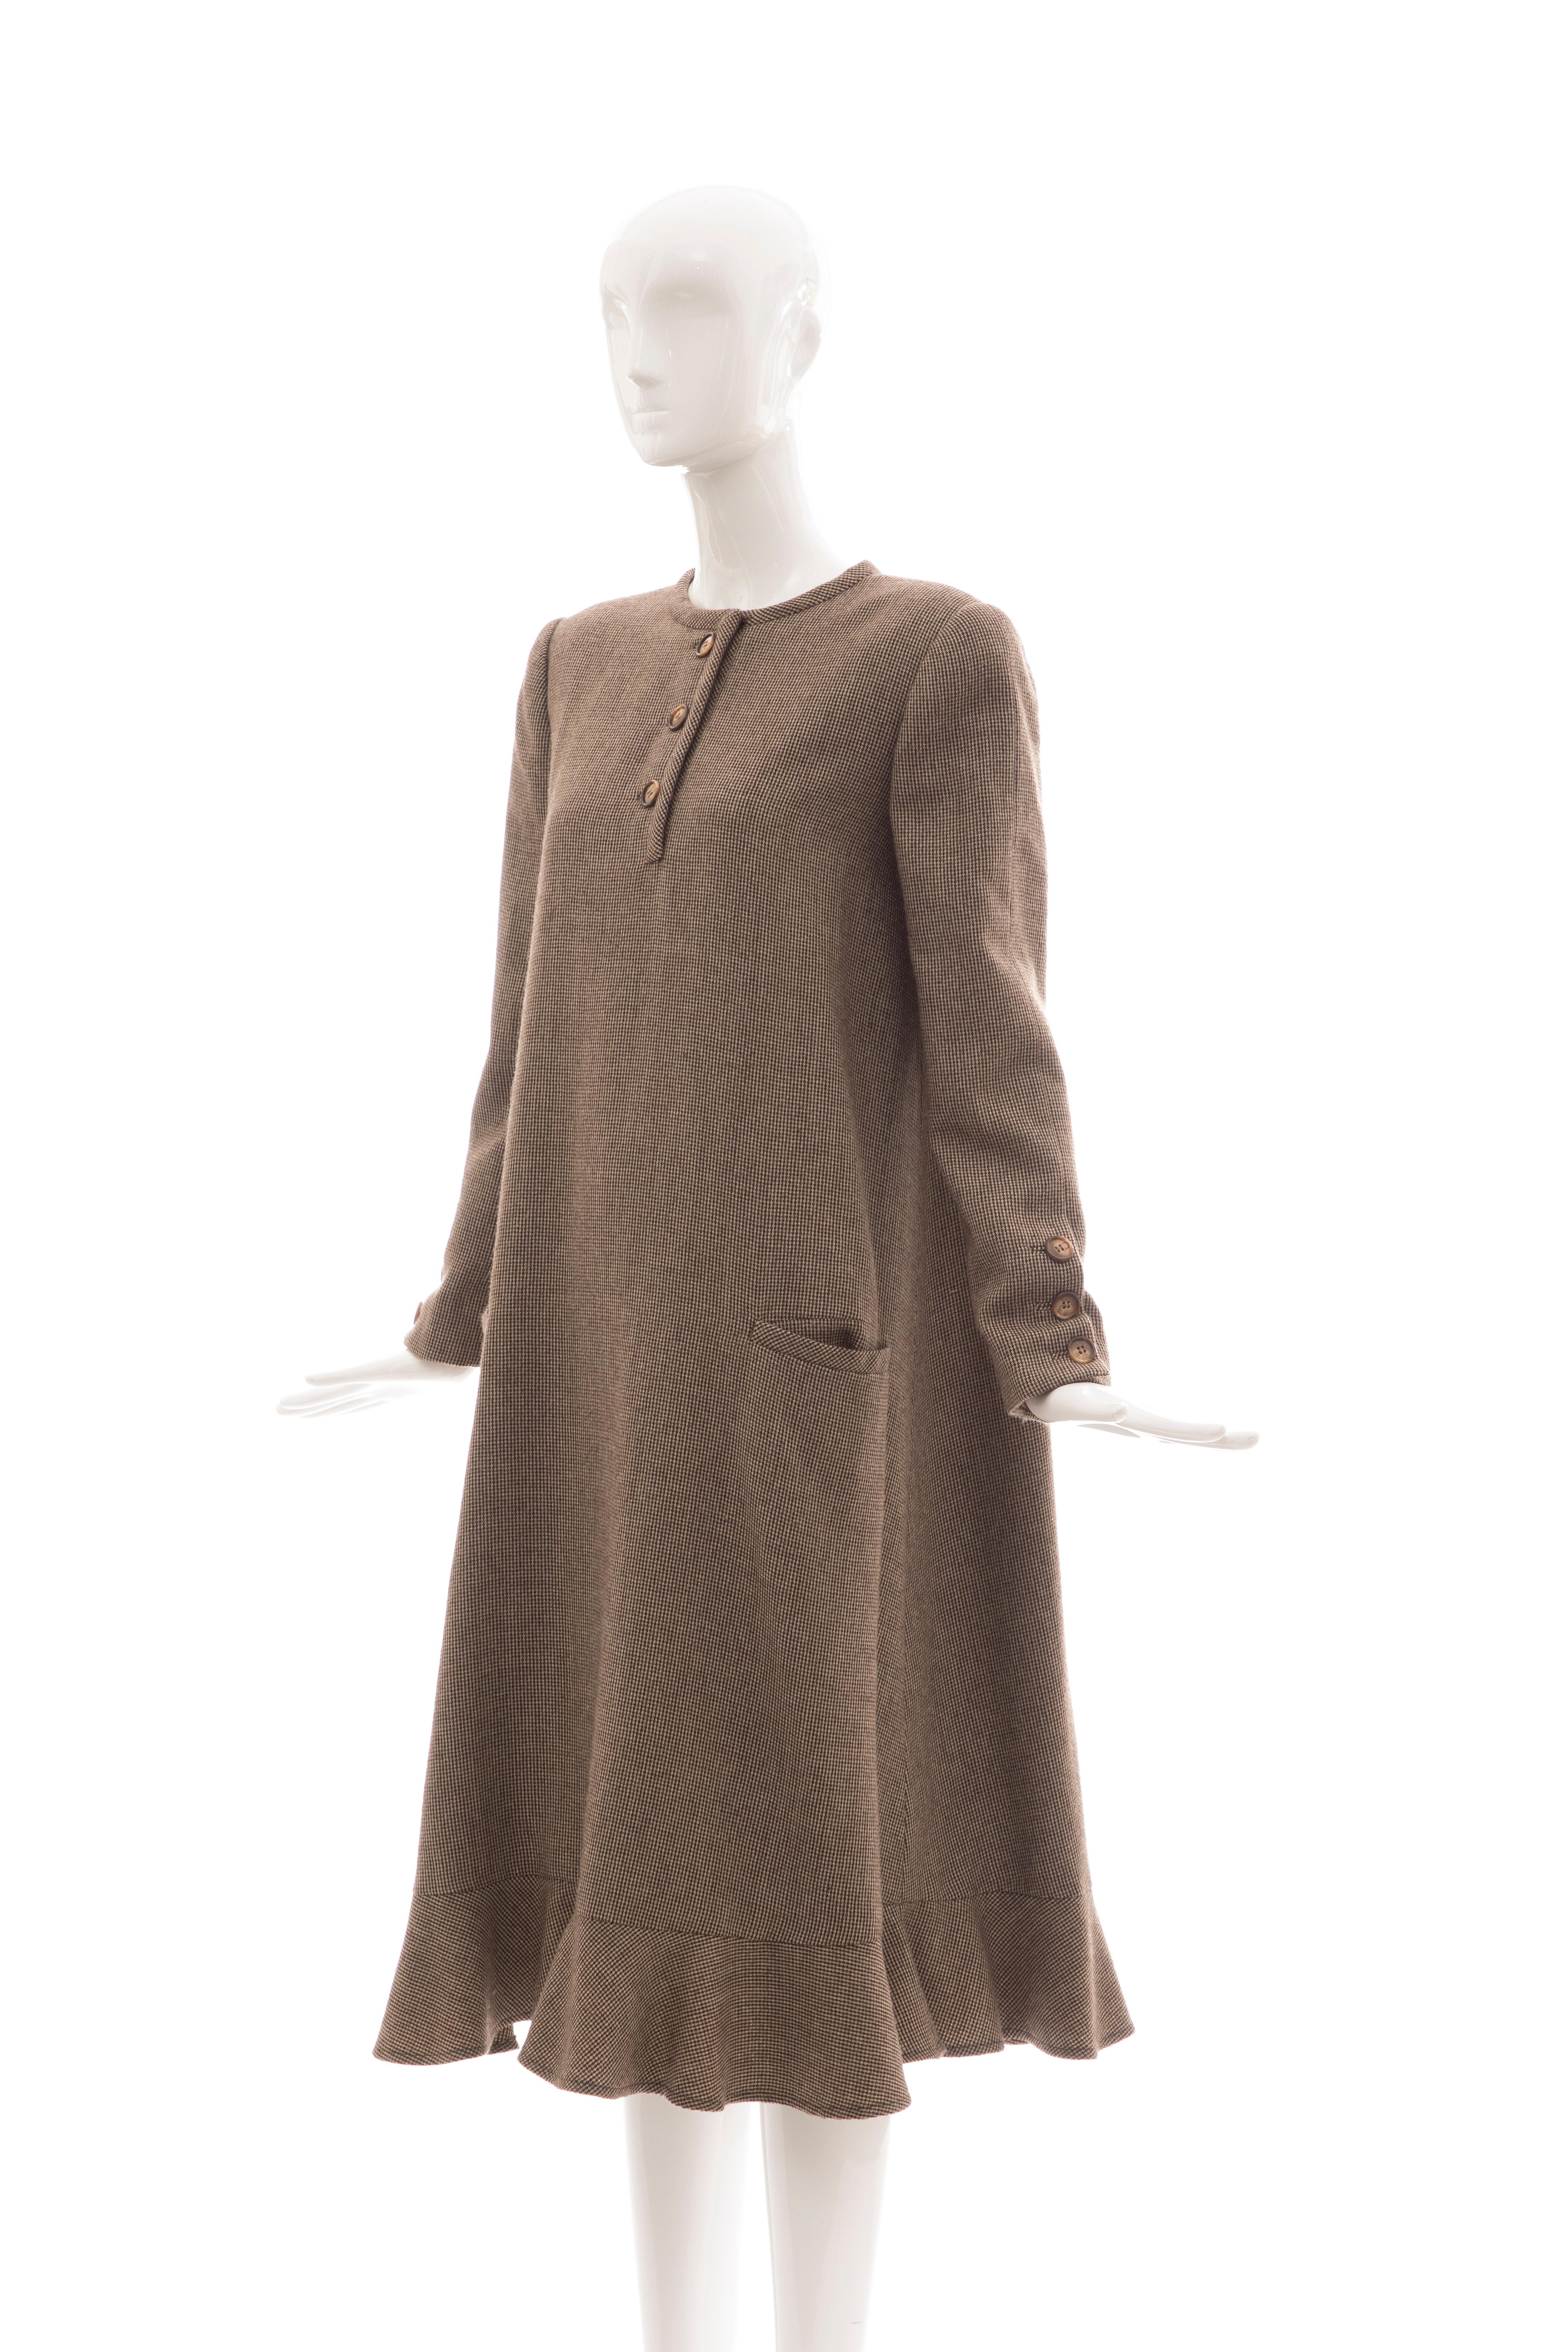 Bill Blass Brown Wool Tweed A Line Button Front Dress, Circa: 1970's For Sale 9